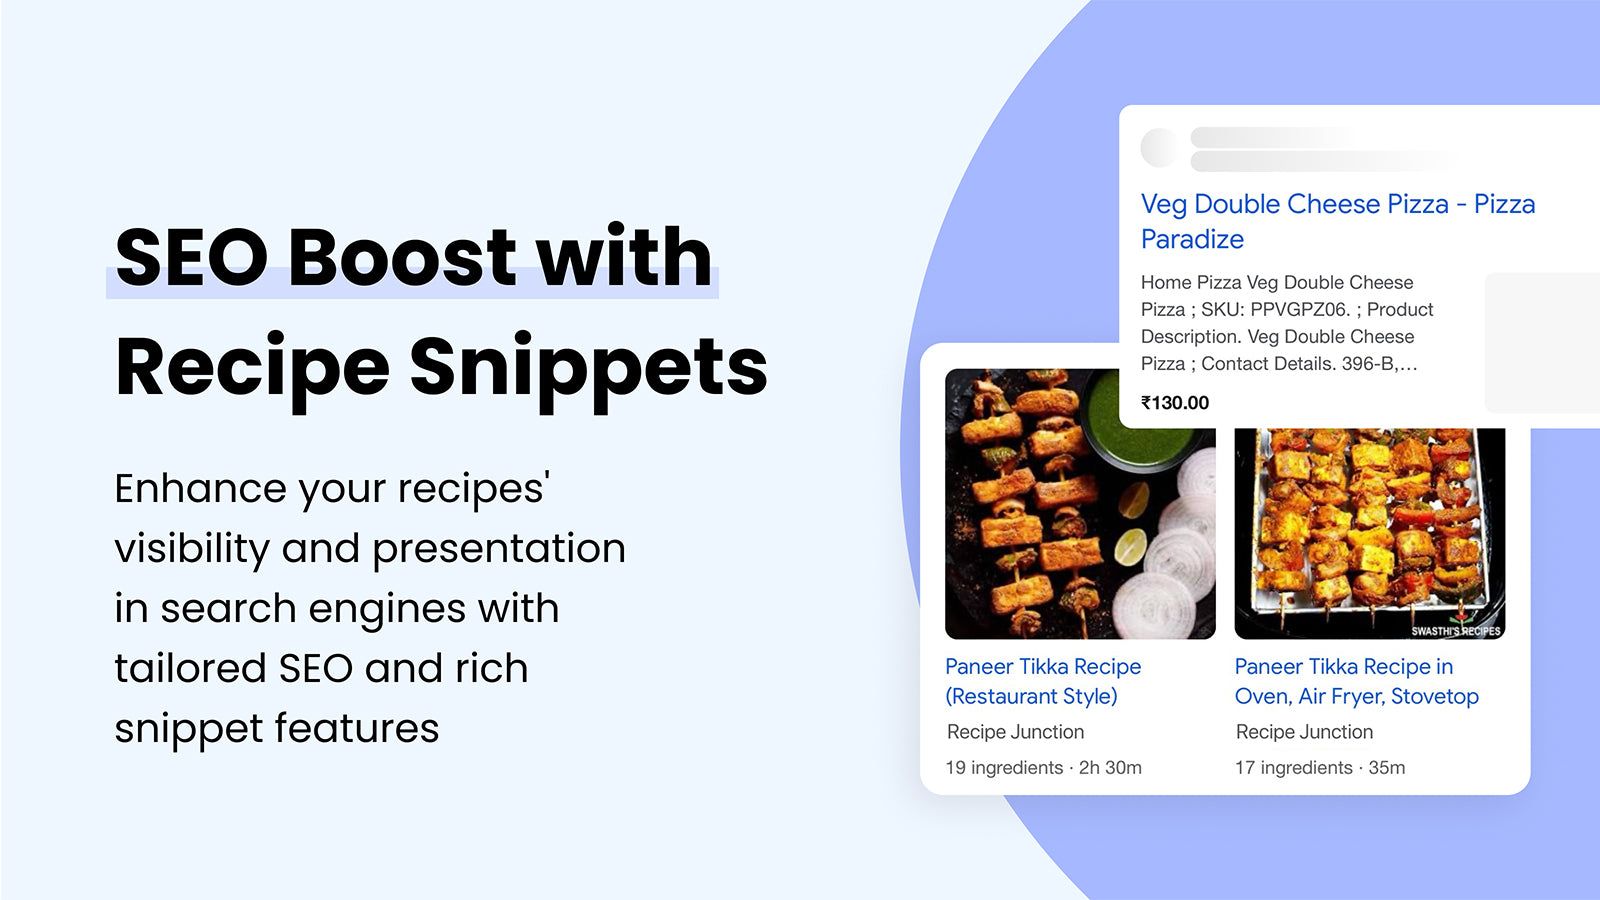 SEO Boost with Recipe Snippets